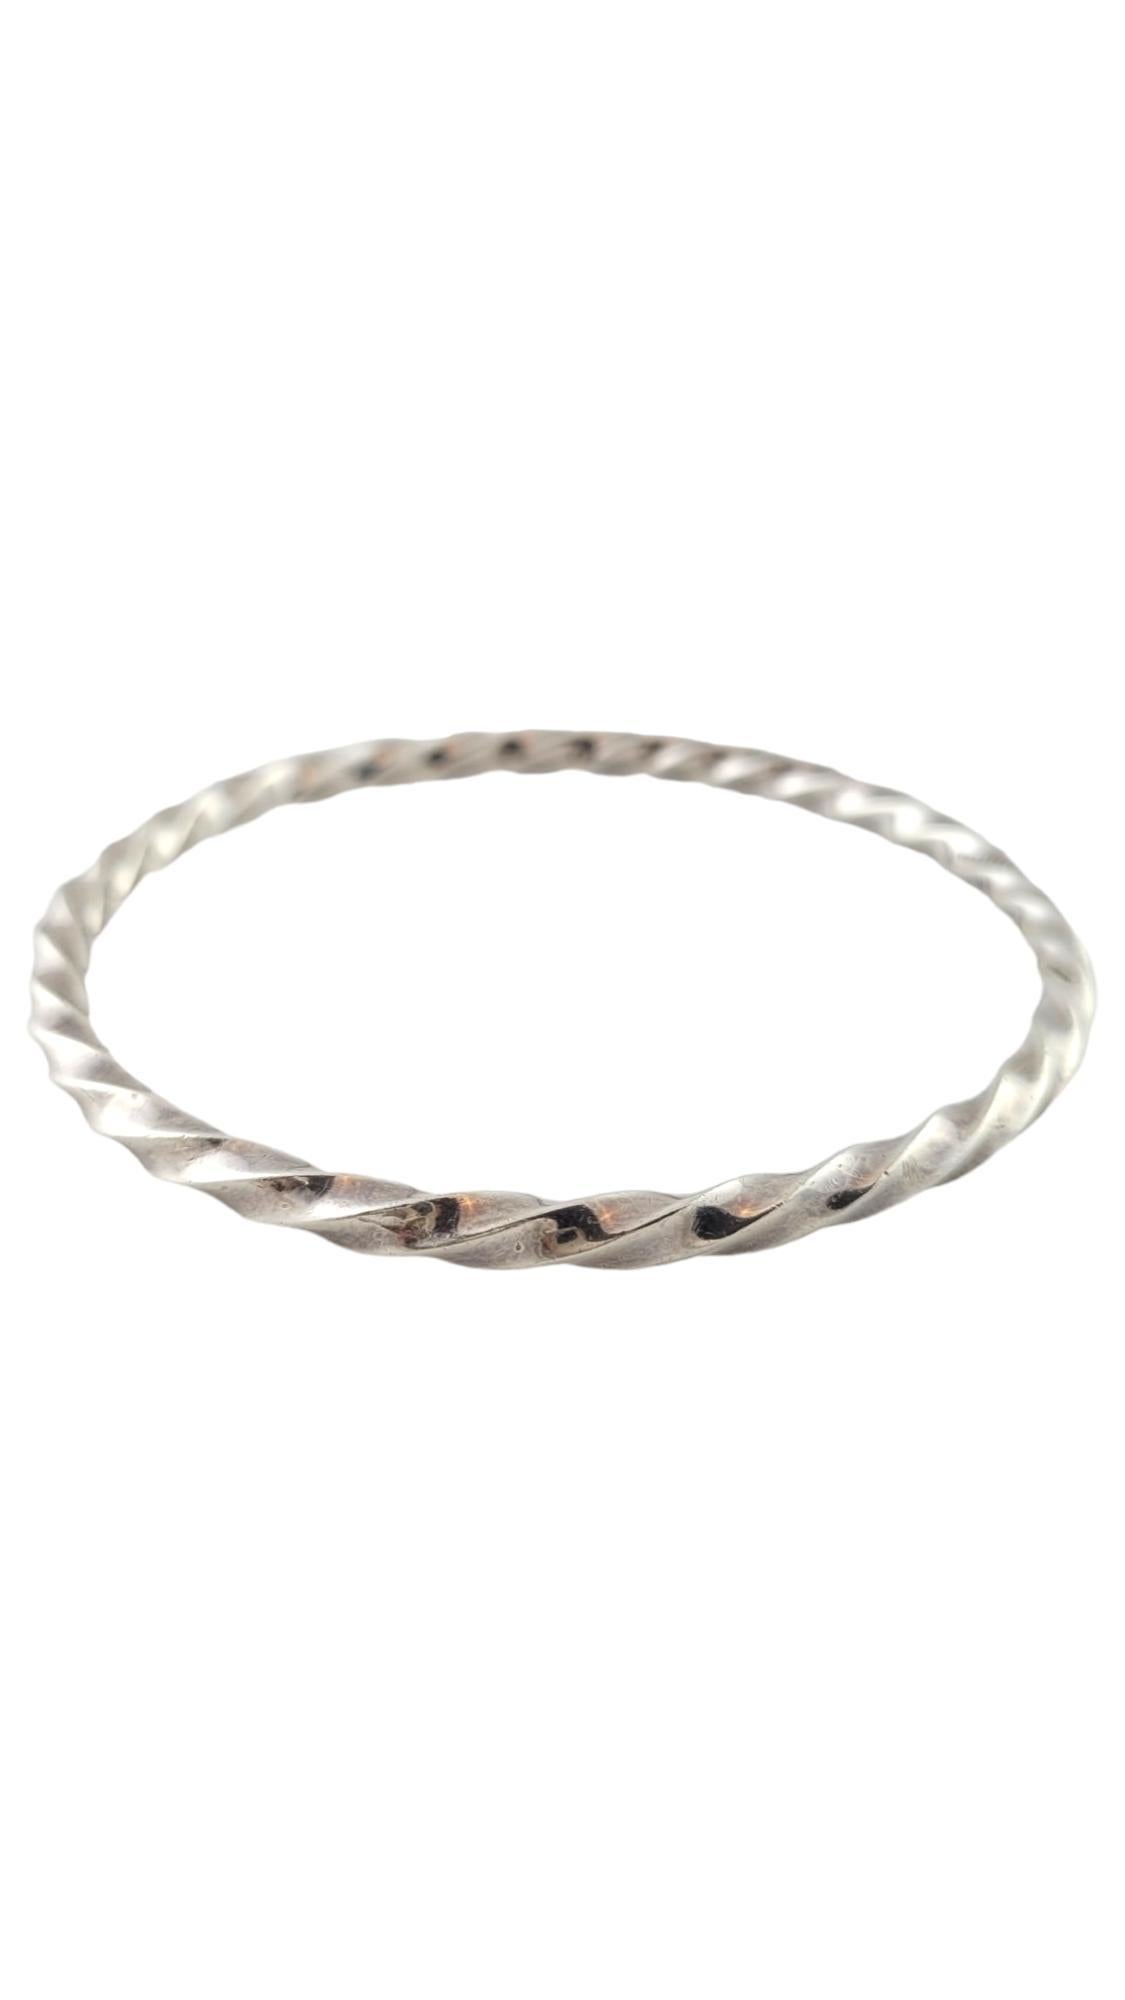 Tiffany & Co. Sterling Silver Twist Bangle Bracelet #17394 In Good Condition For Sale In Washington Depot, CT